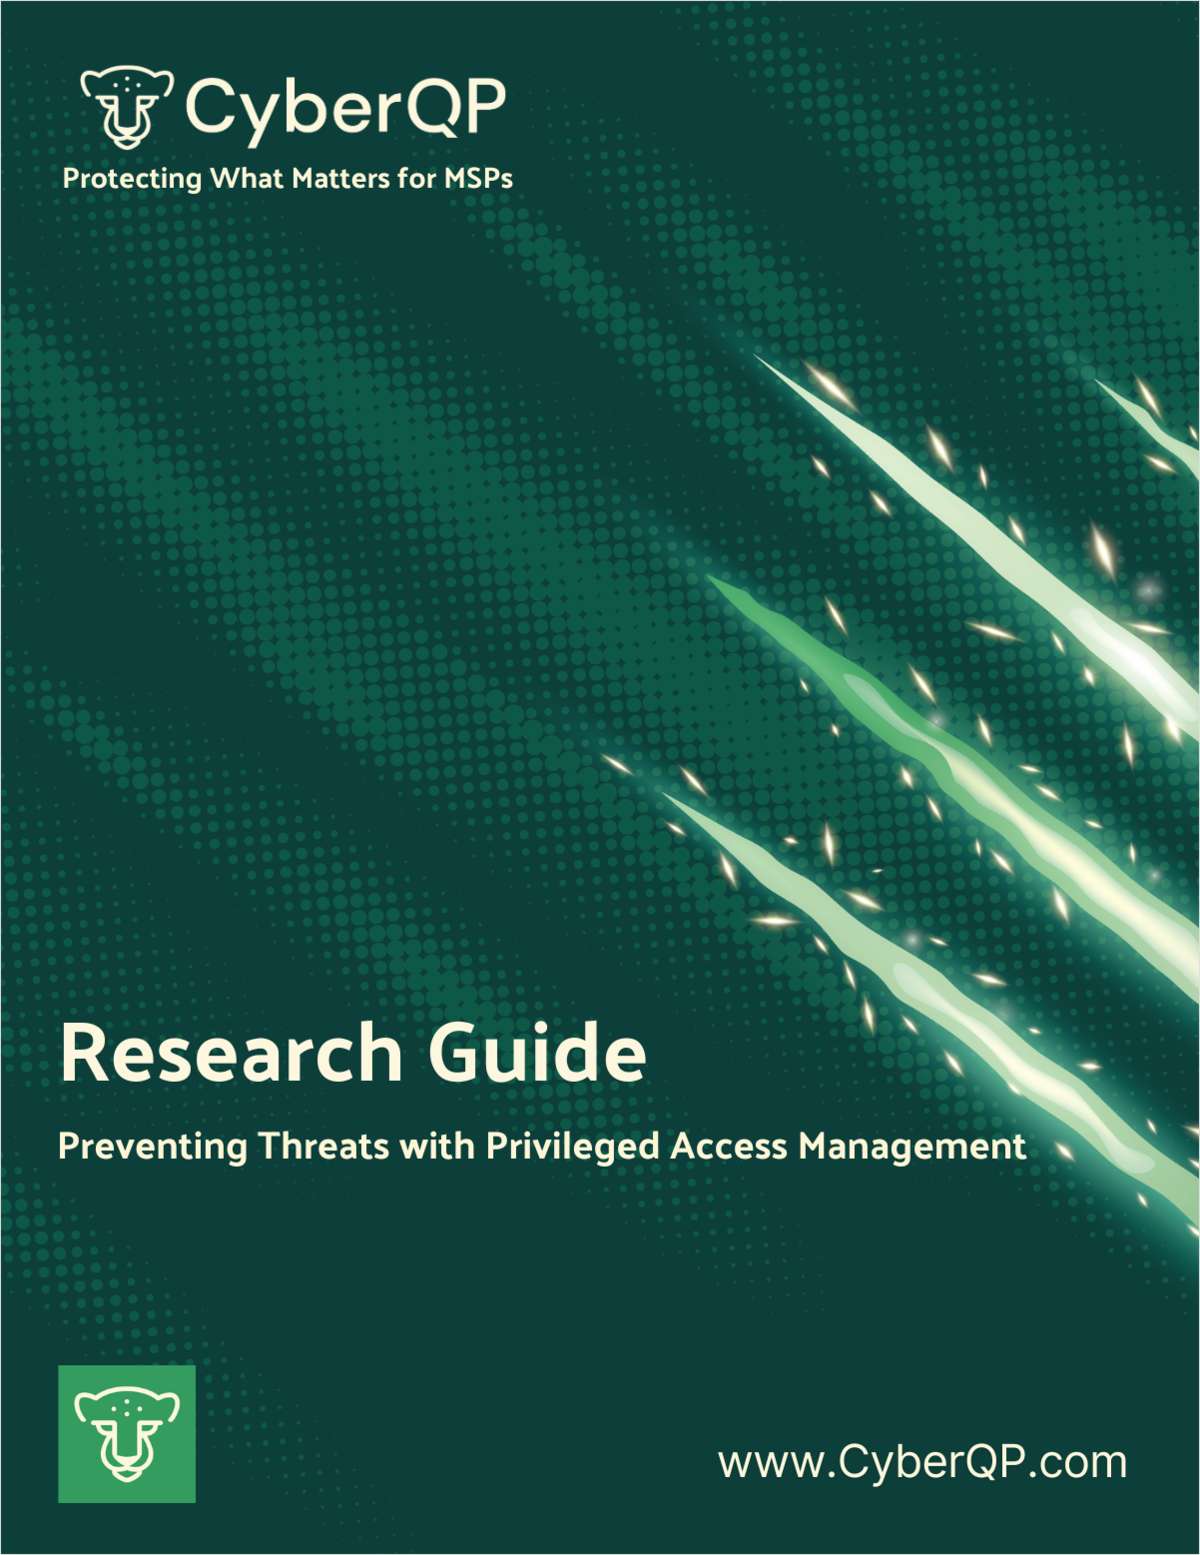 CyberQP Research Guide: Preventing Threats with Privileged Access Management